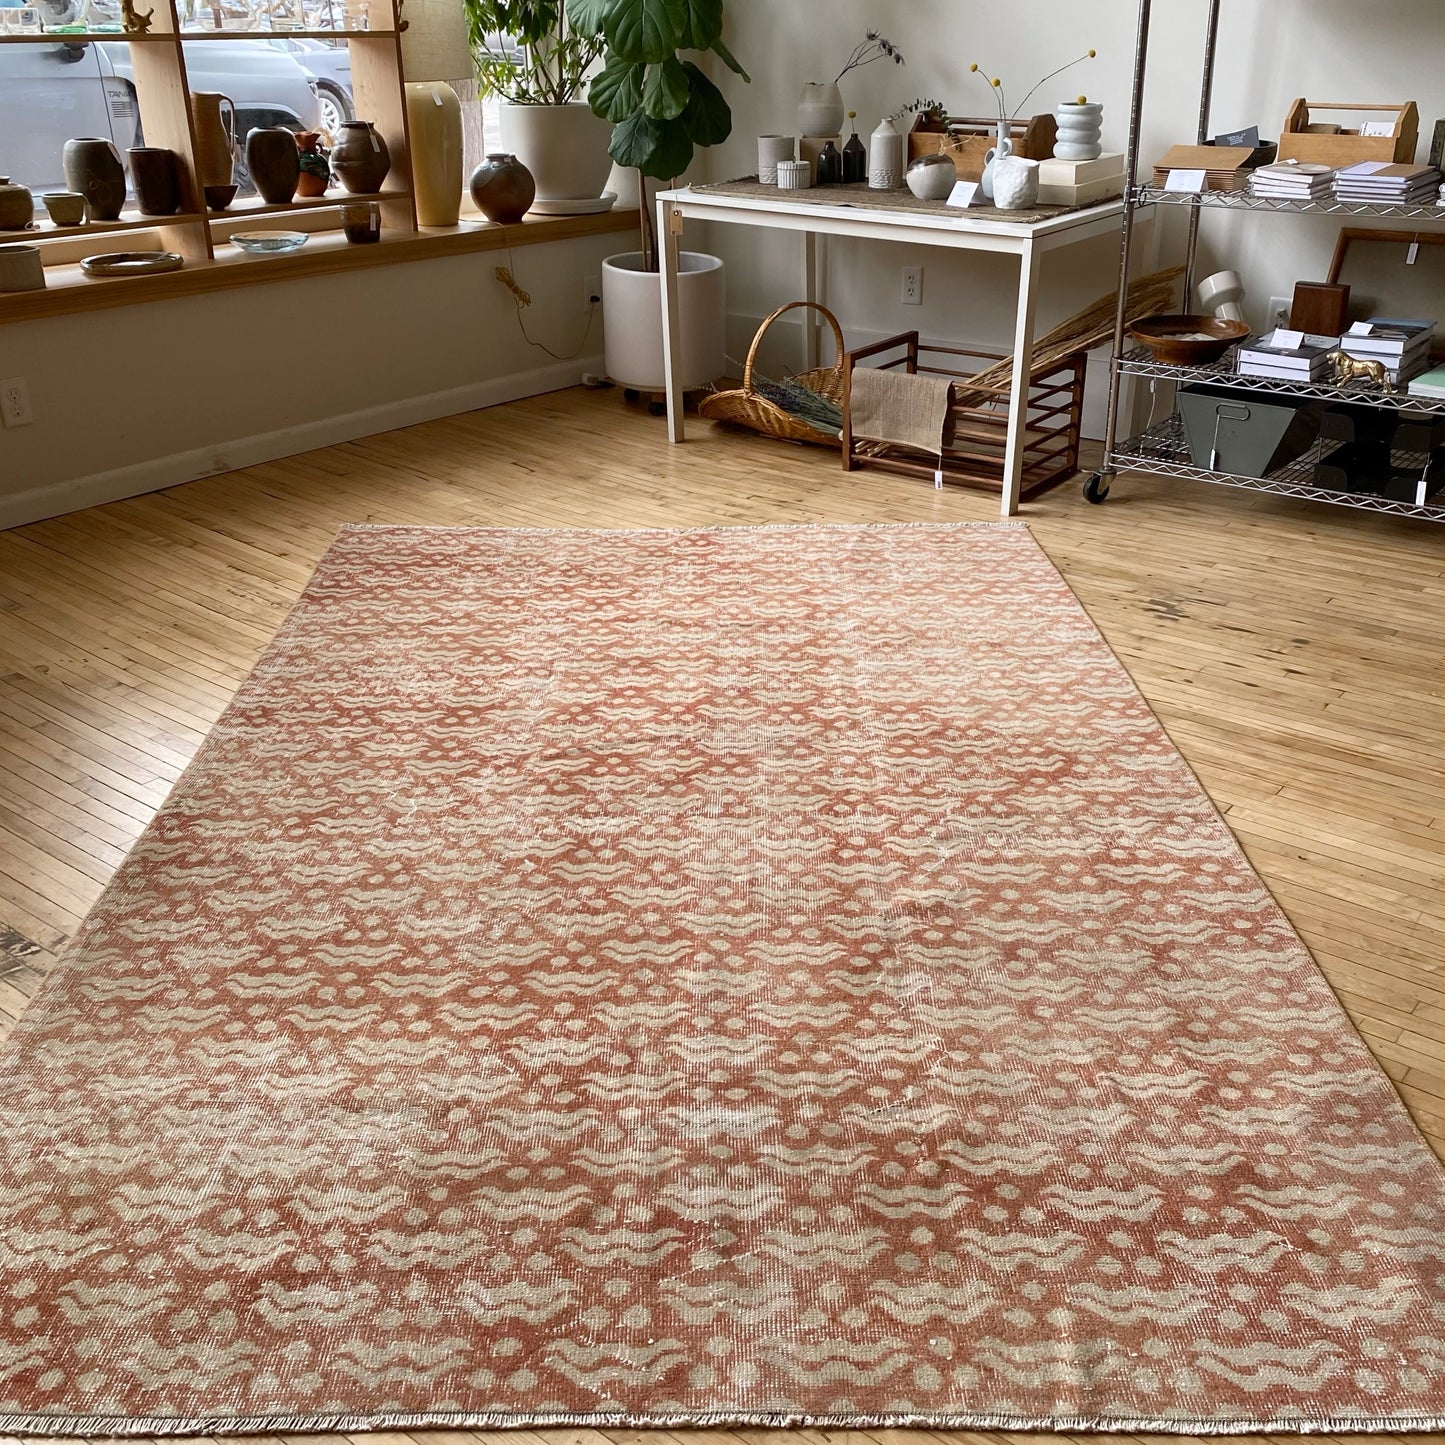 "INES" Vintage Hand-knotted Rug (5’11” x 9’2”)